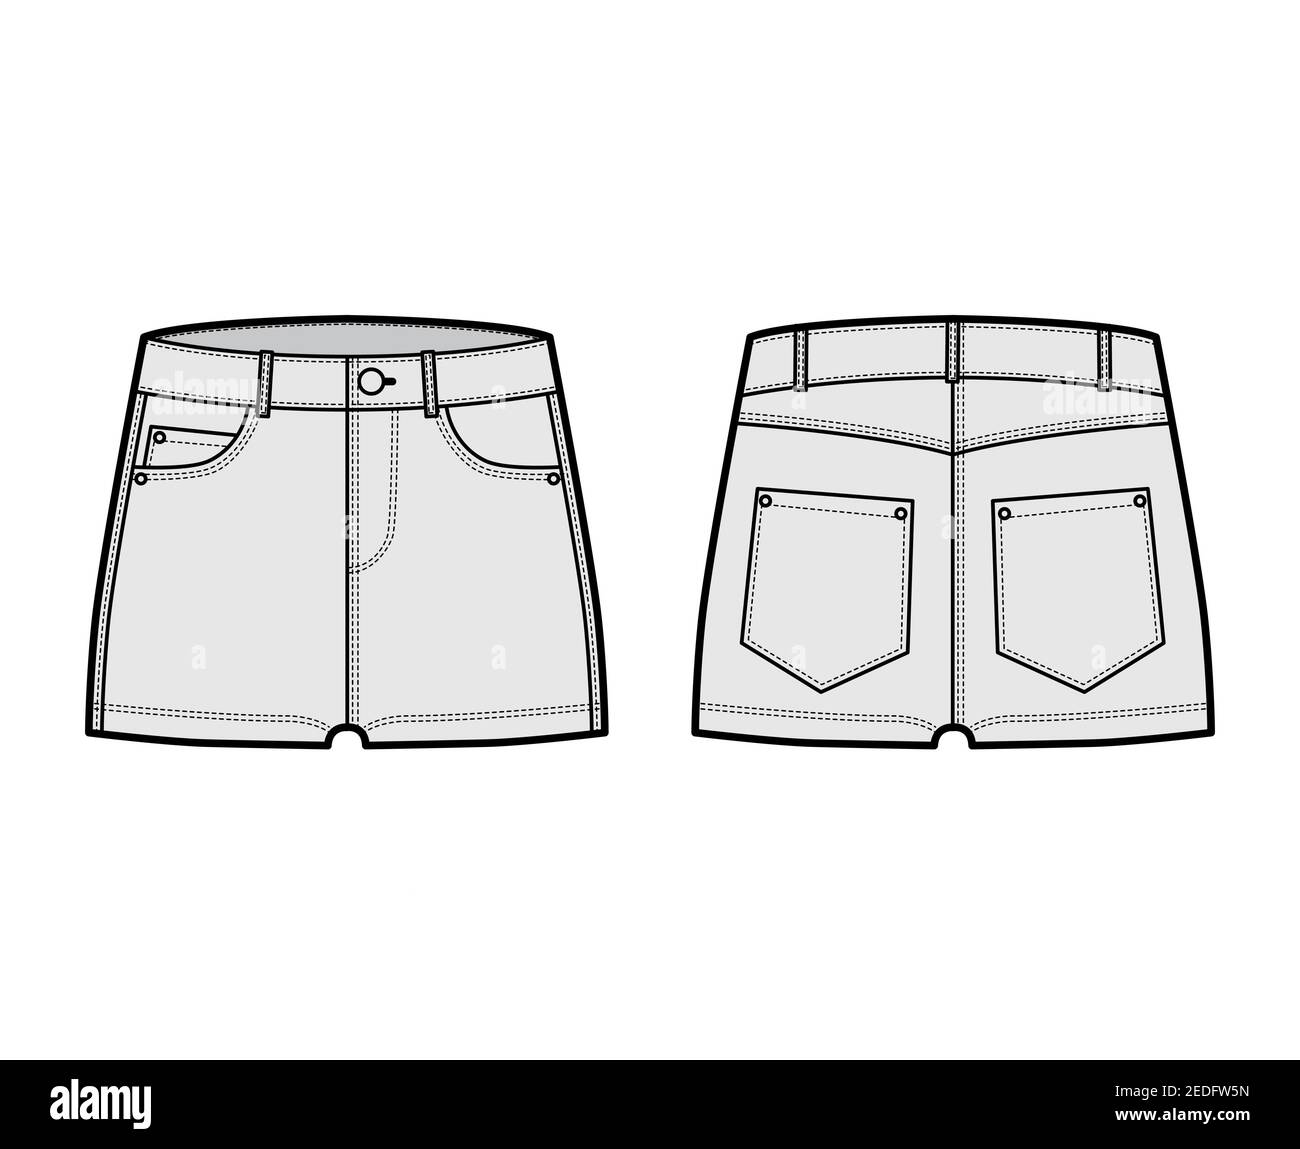 Hot pants Stock Vector Images - Alamy